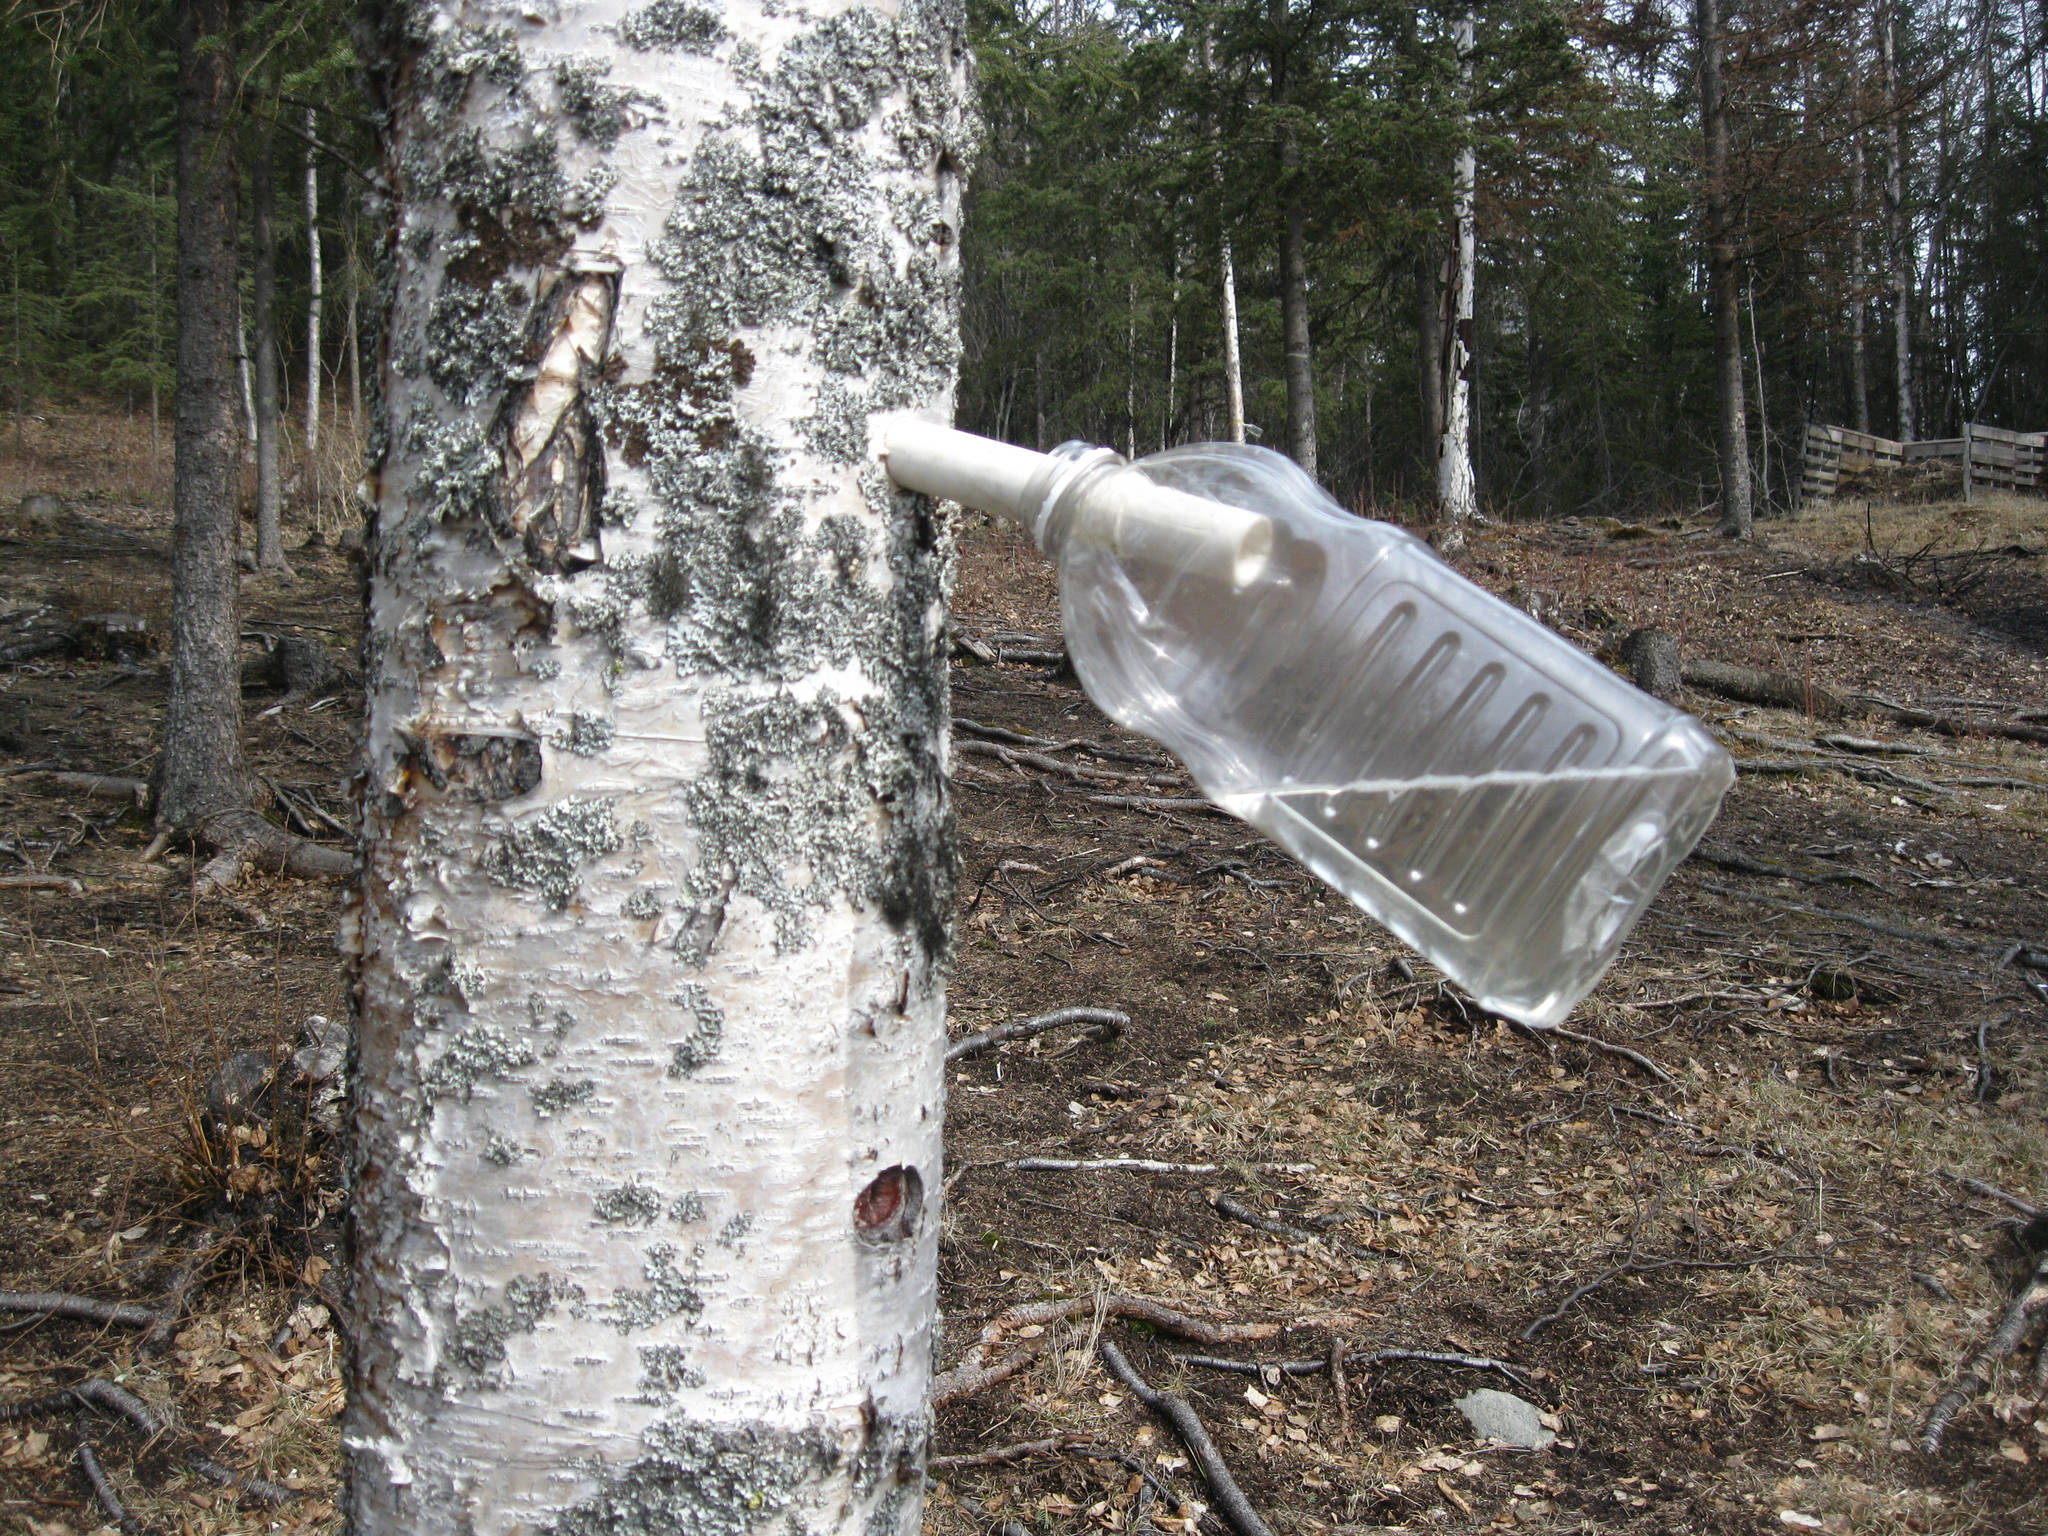 A plastic bottle hangs from a spiel to collect birch sap. (Photo by Jennifer Tarnacki)